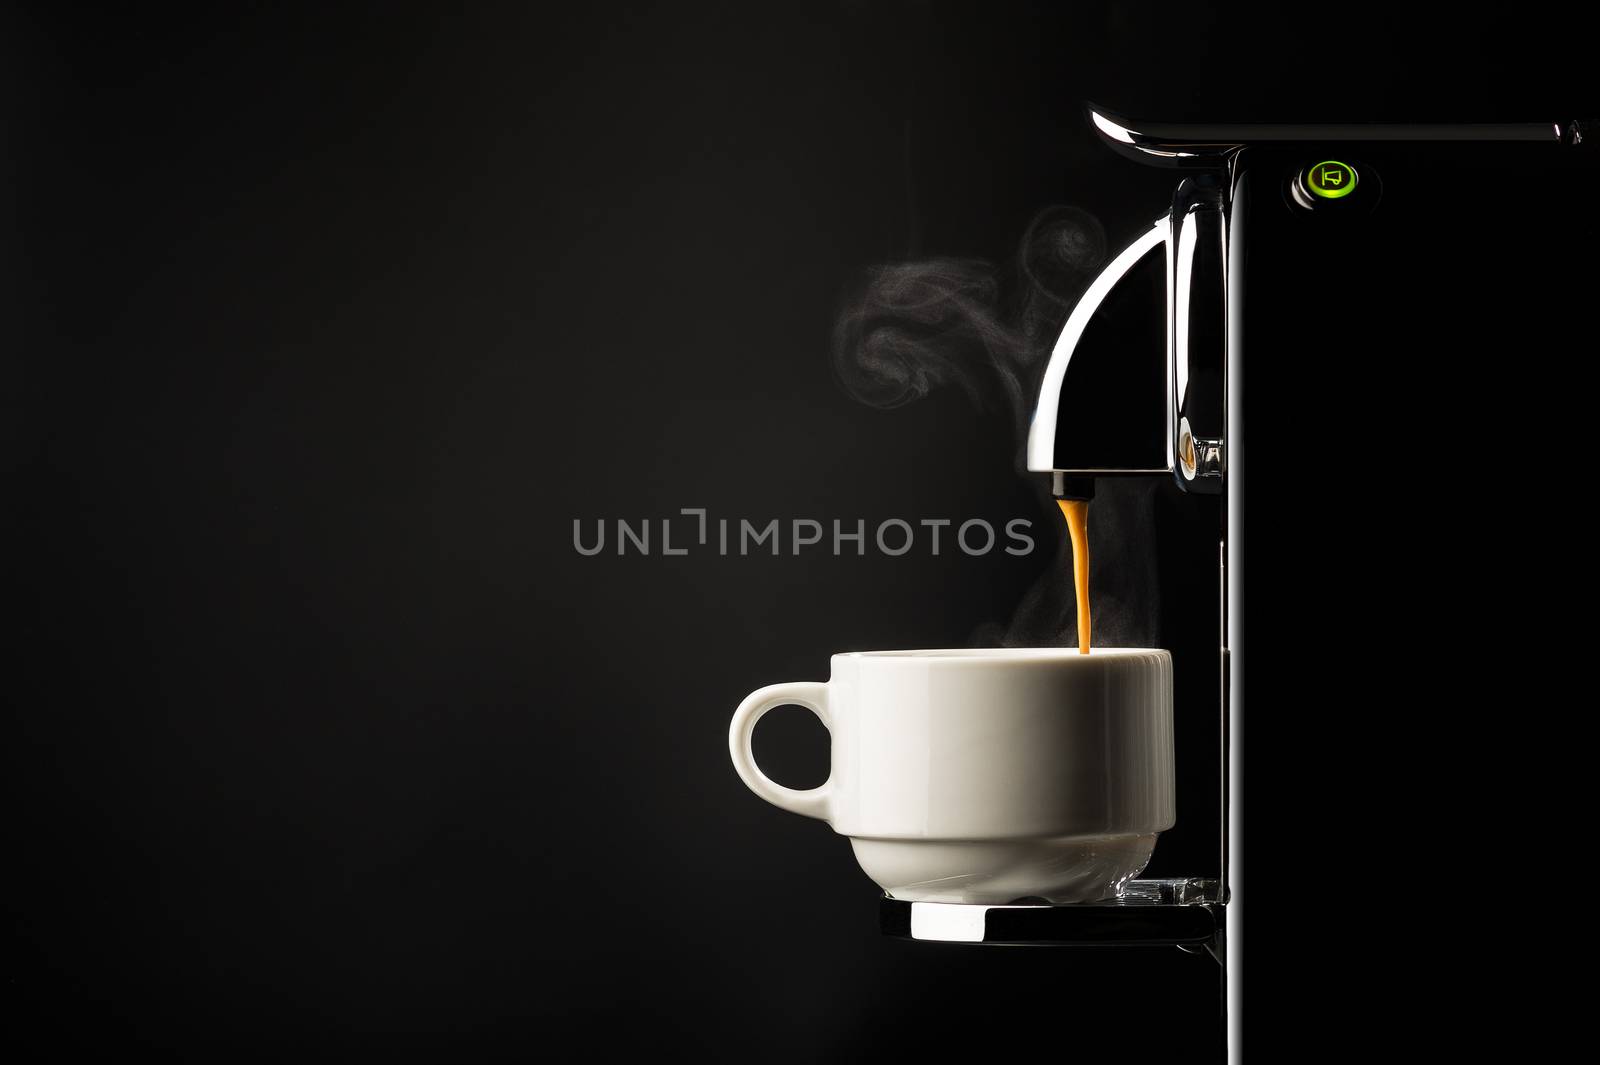 Preparing a cup of strong freshly brewed espresso coffee using a coffee machine with a side view of the beverage pouring into a white cup on a dark shadowy background